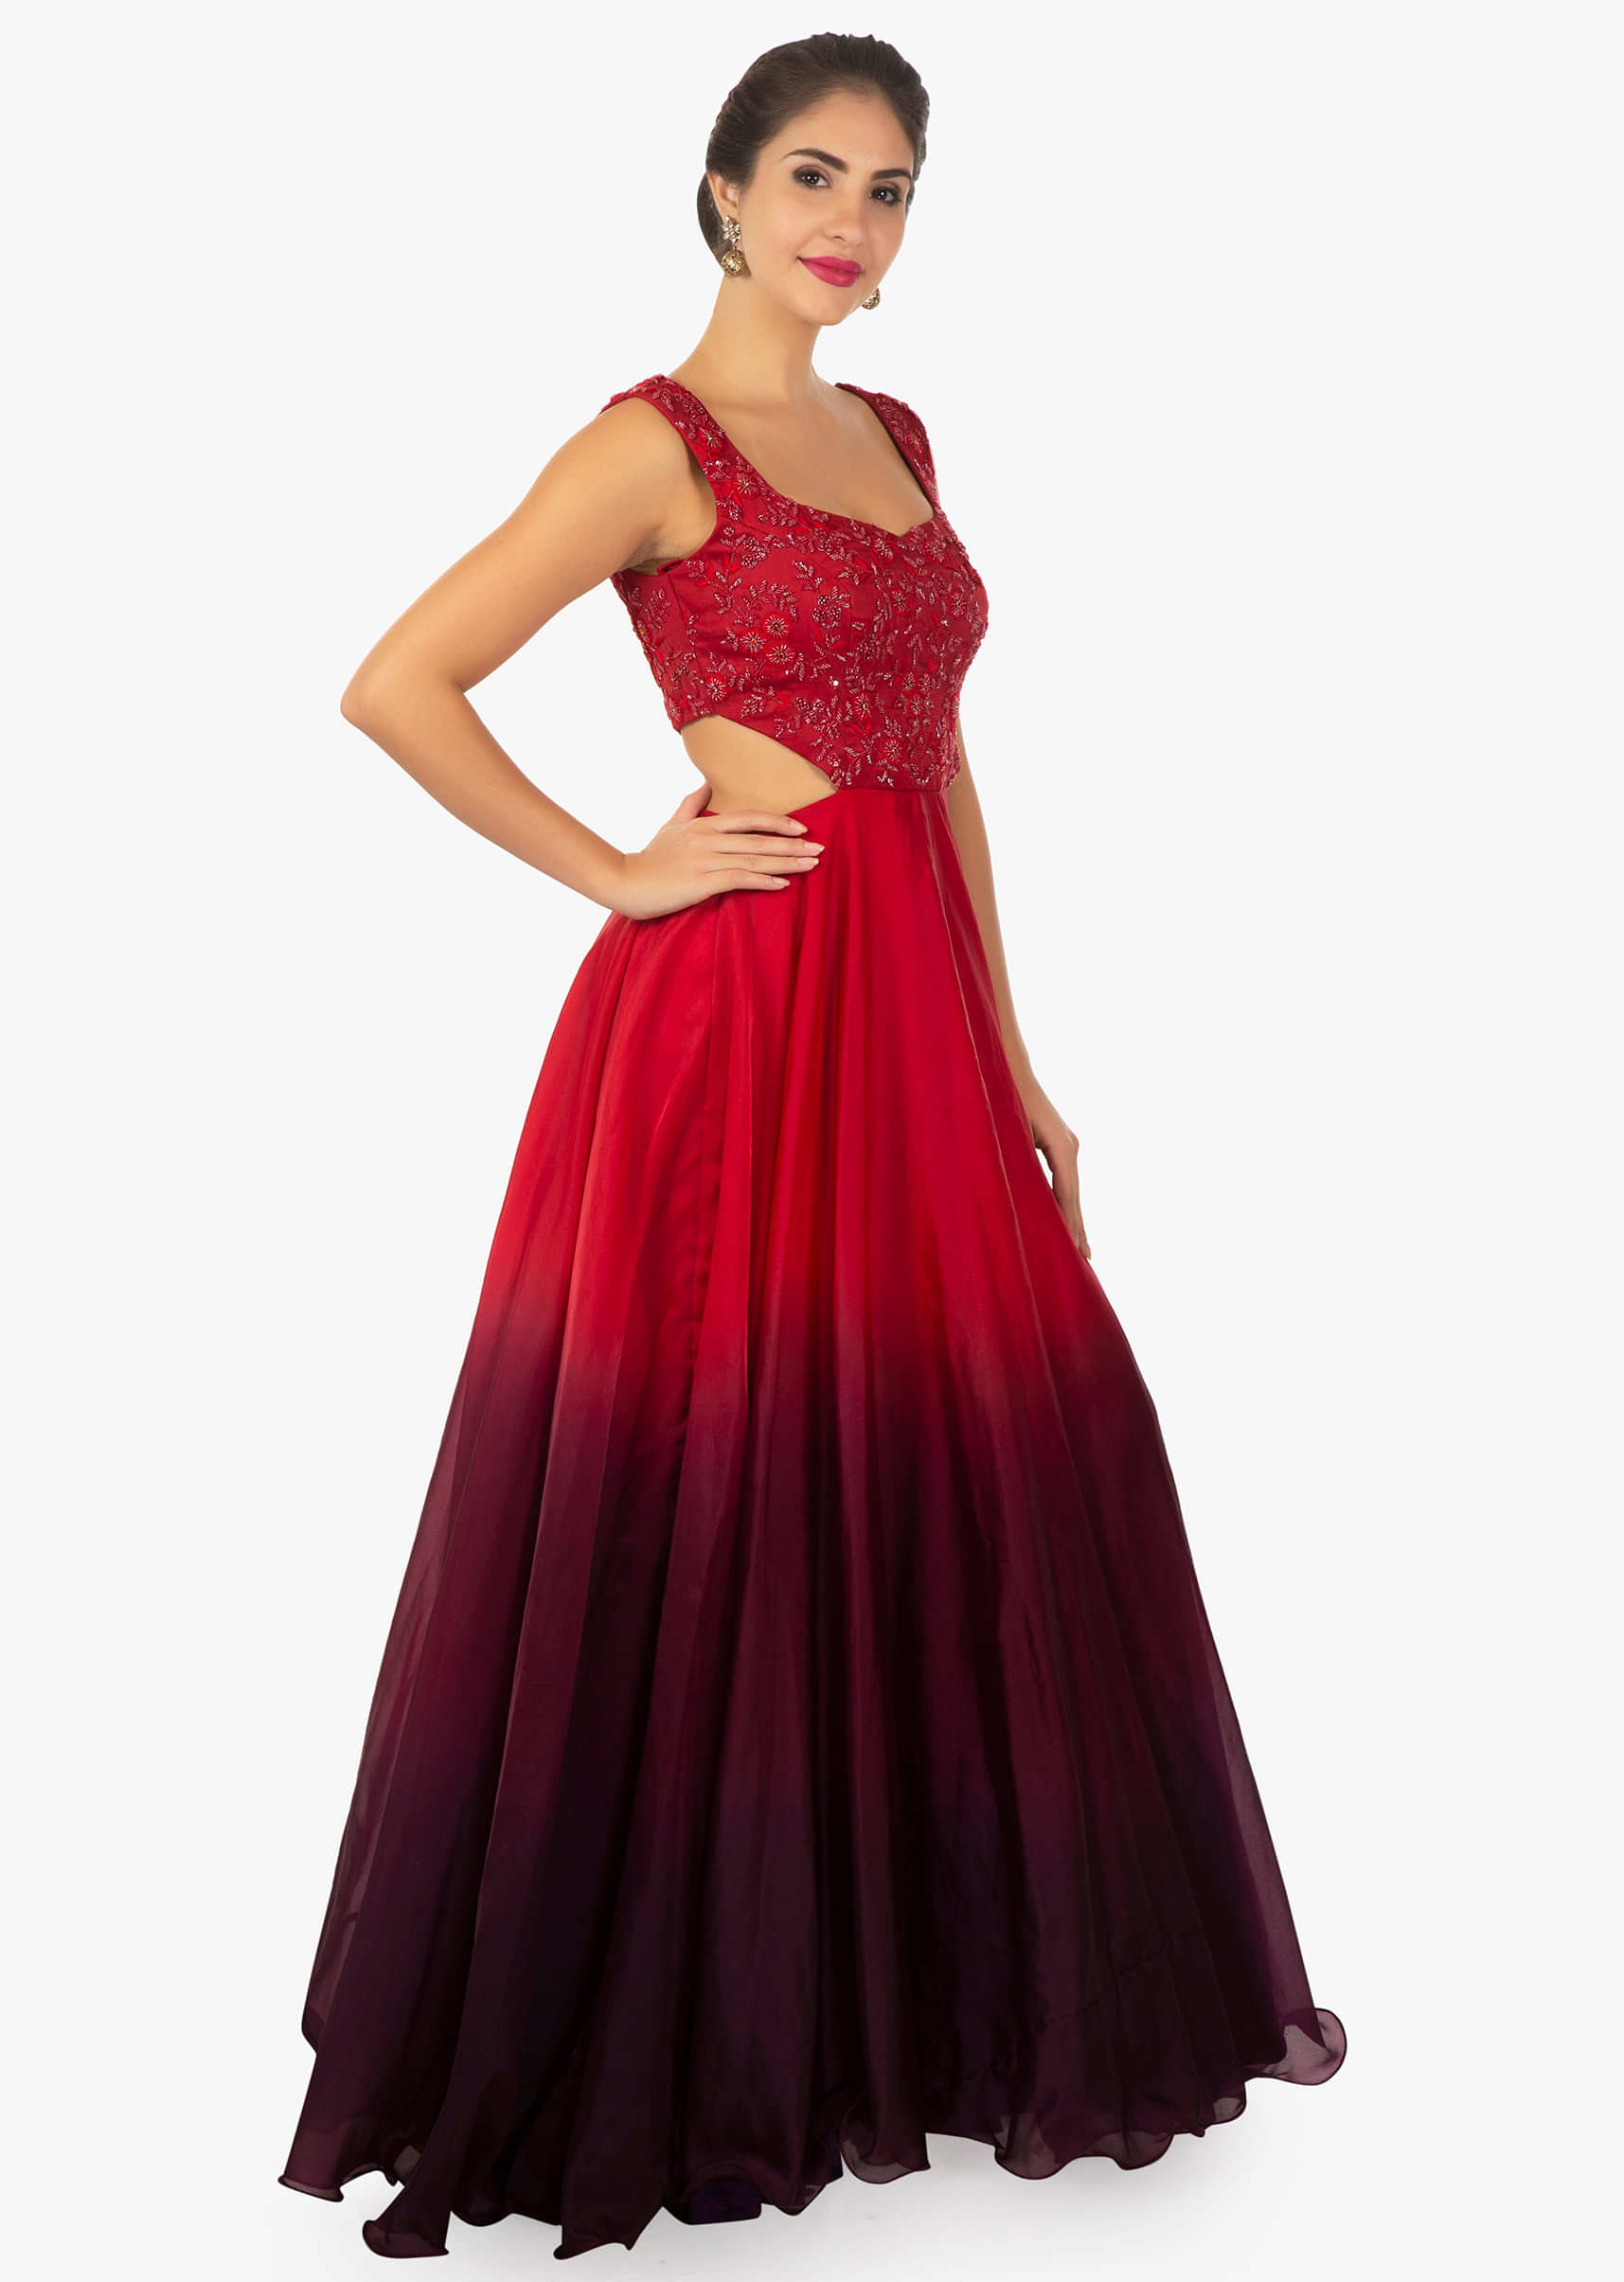 Red shaded organza gown crafted with hand embroidery on the bodice